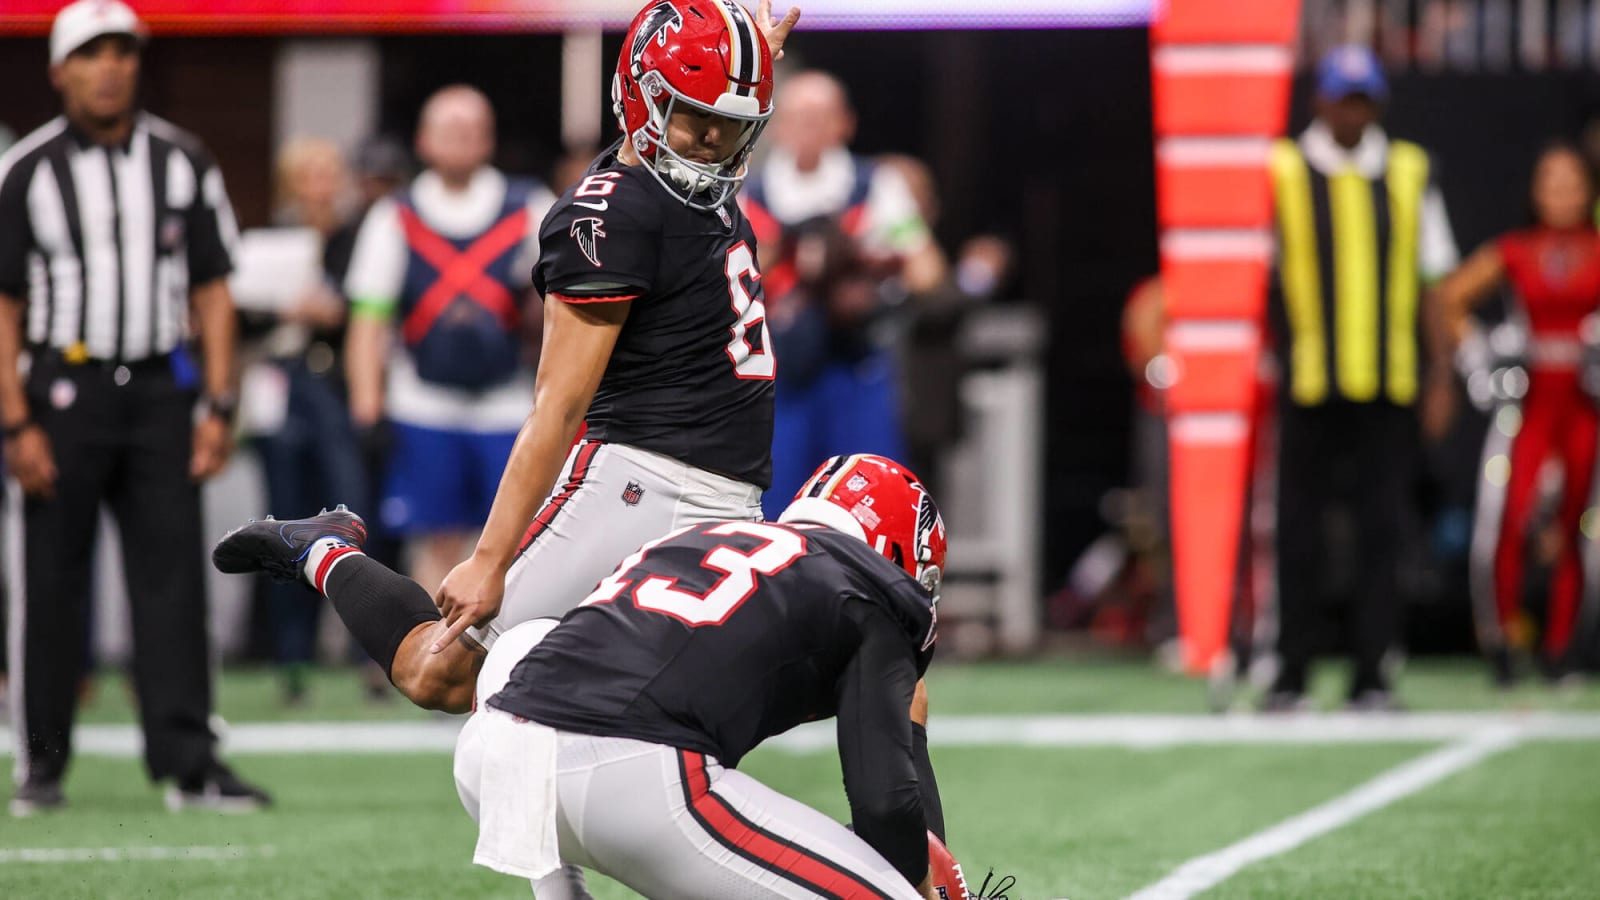 Are the Falcons working out Younghoe Koo’s replacement?